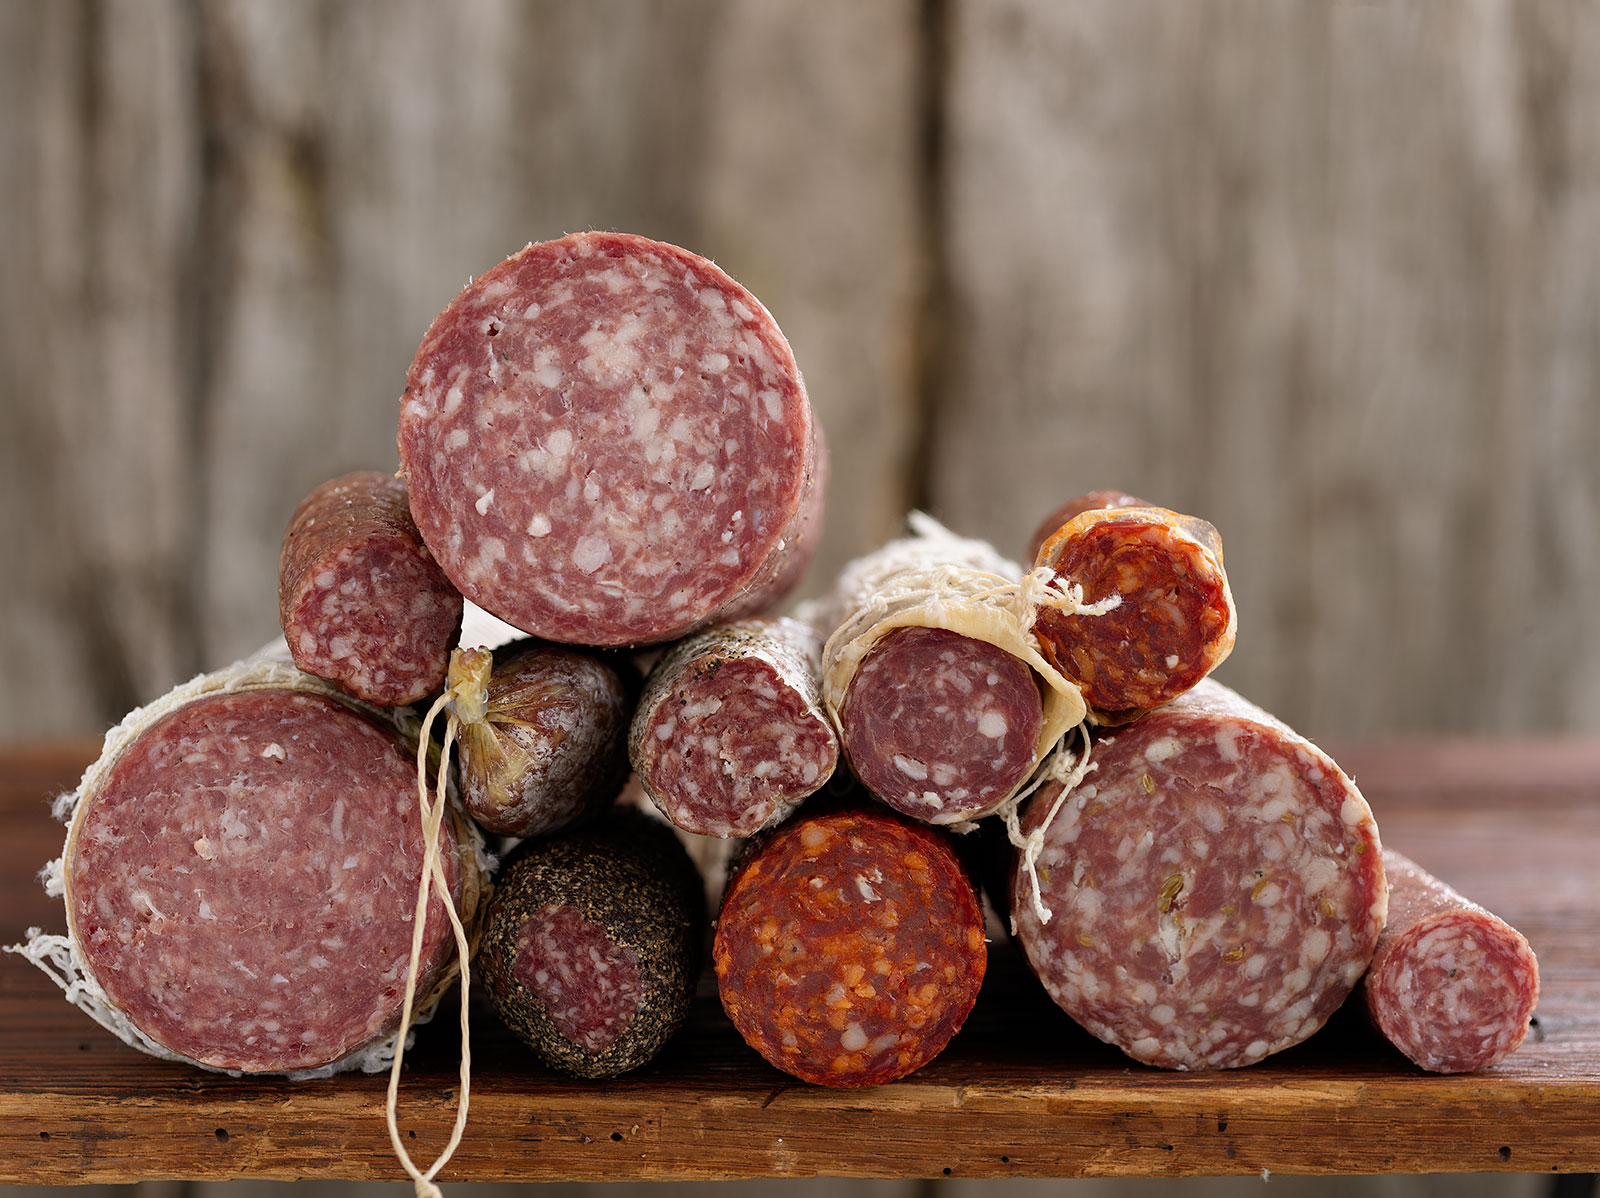 Salami 101 | Different Types Of Salami & How To Tell Them Apart